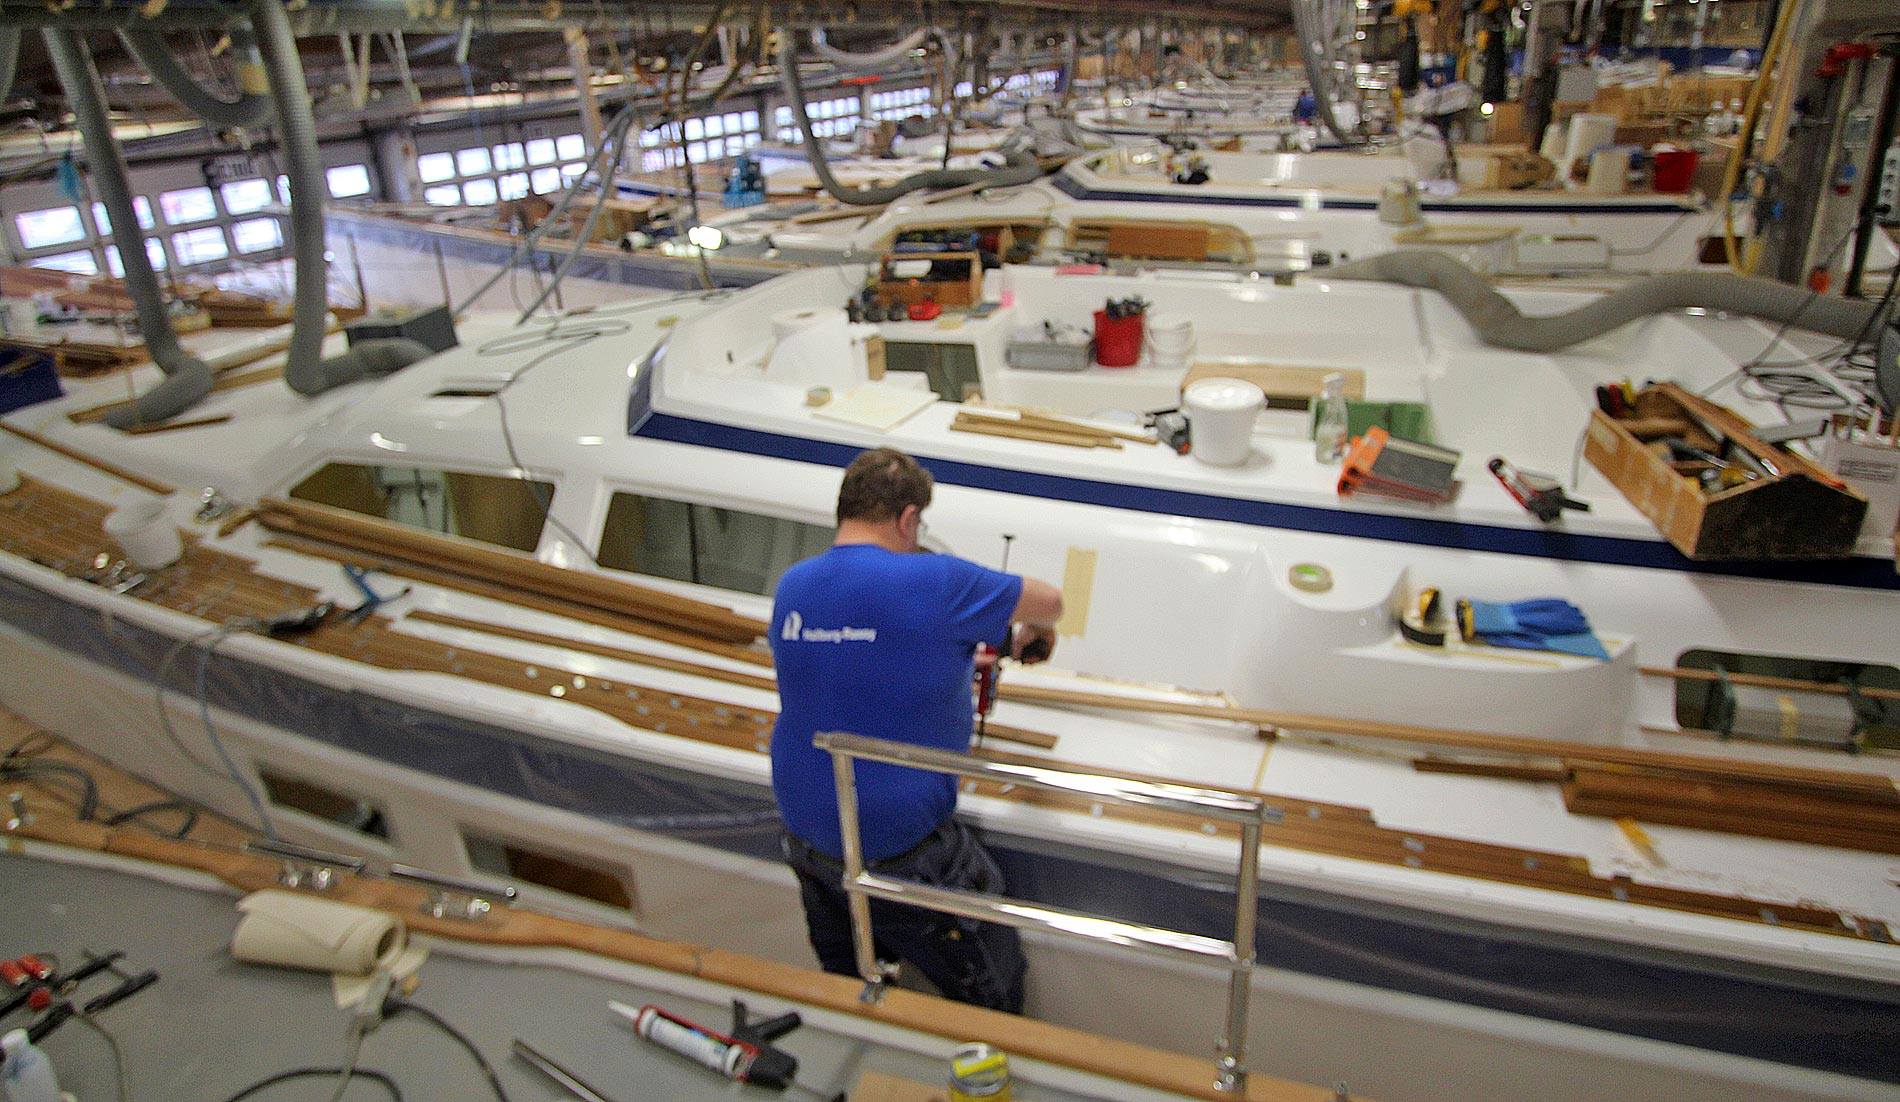 Photos from the Hallberg-Rassy production with 26 yachts in progress